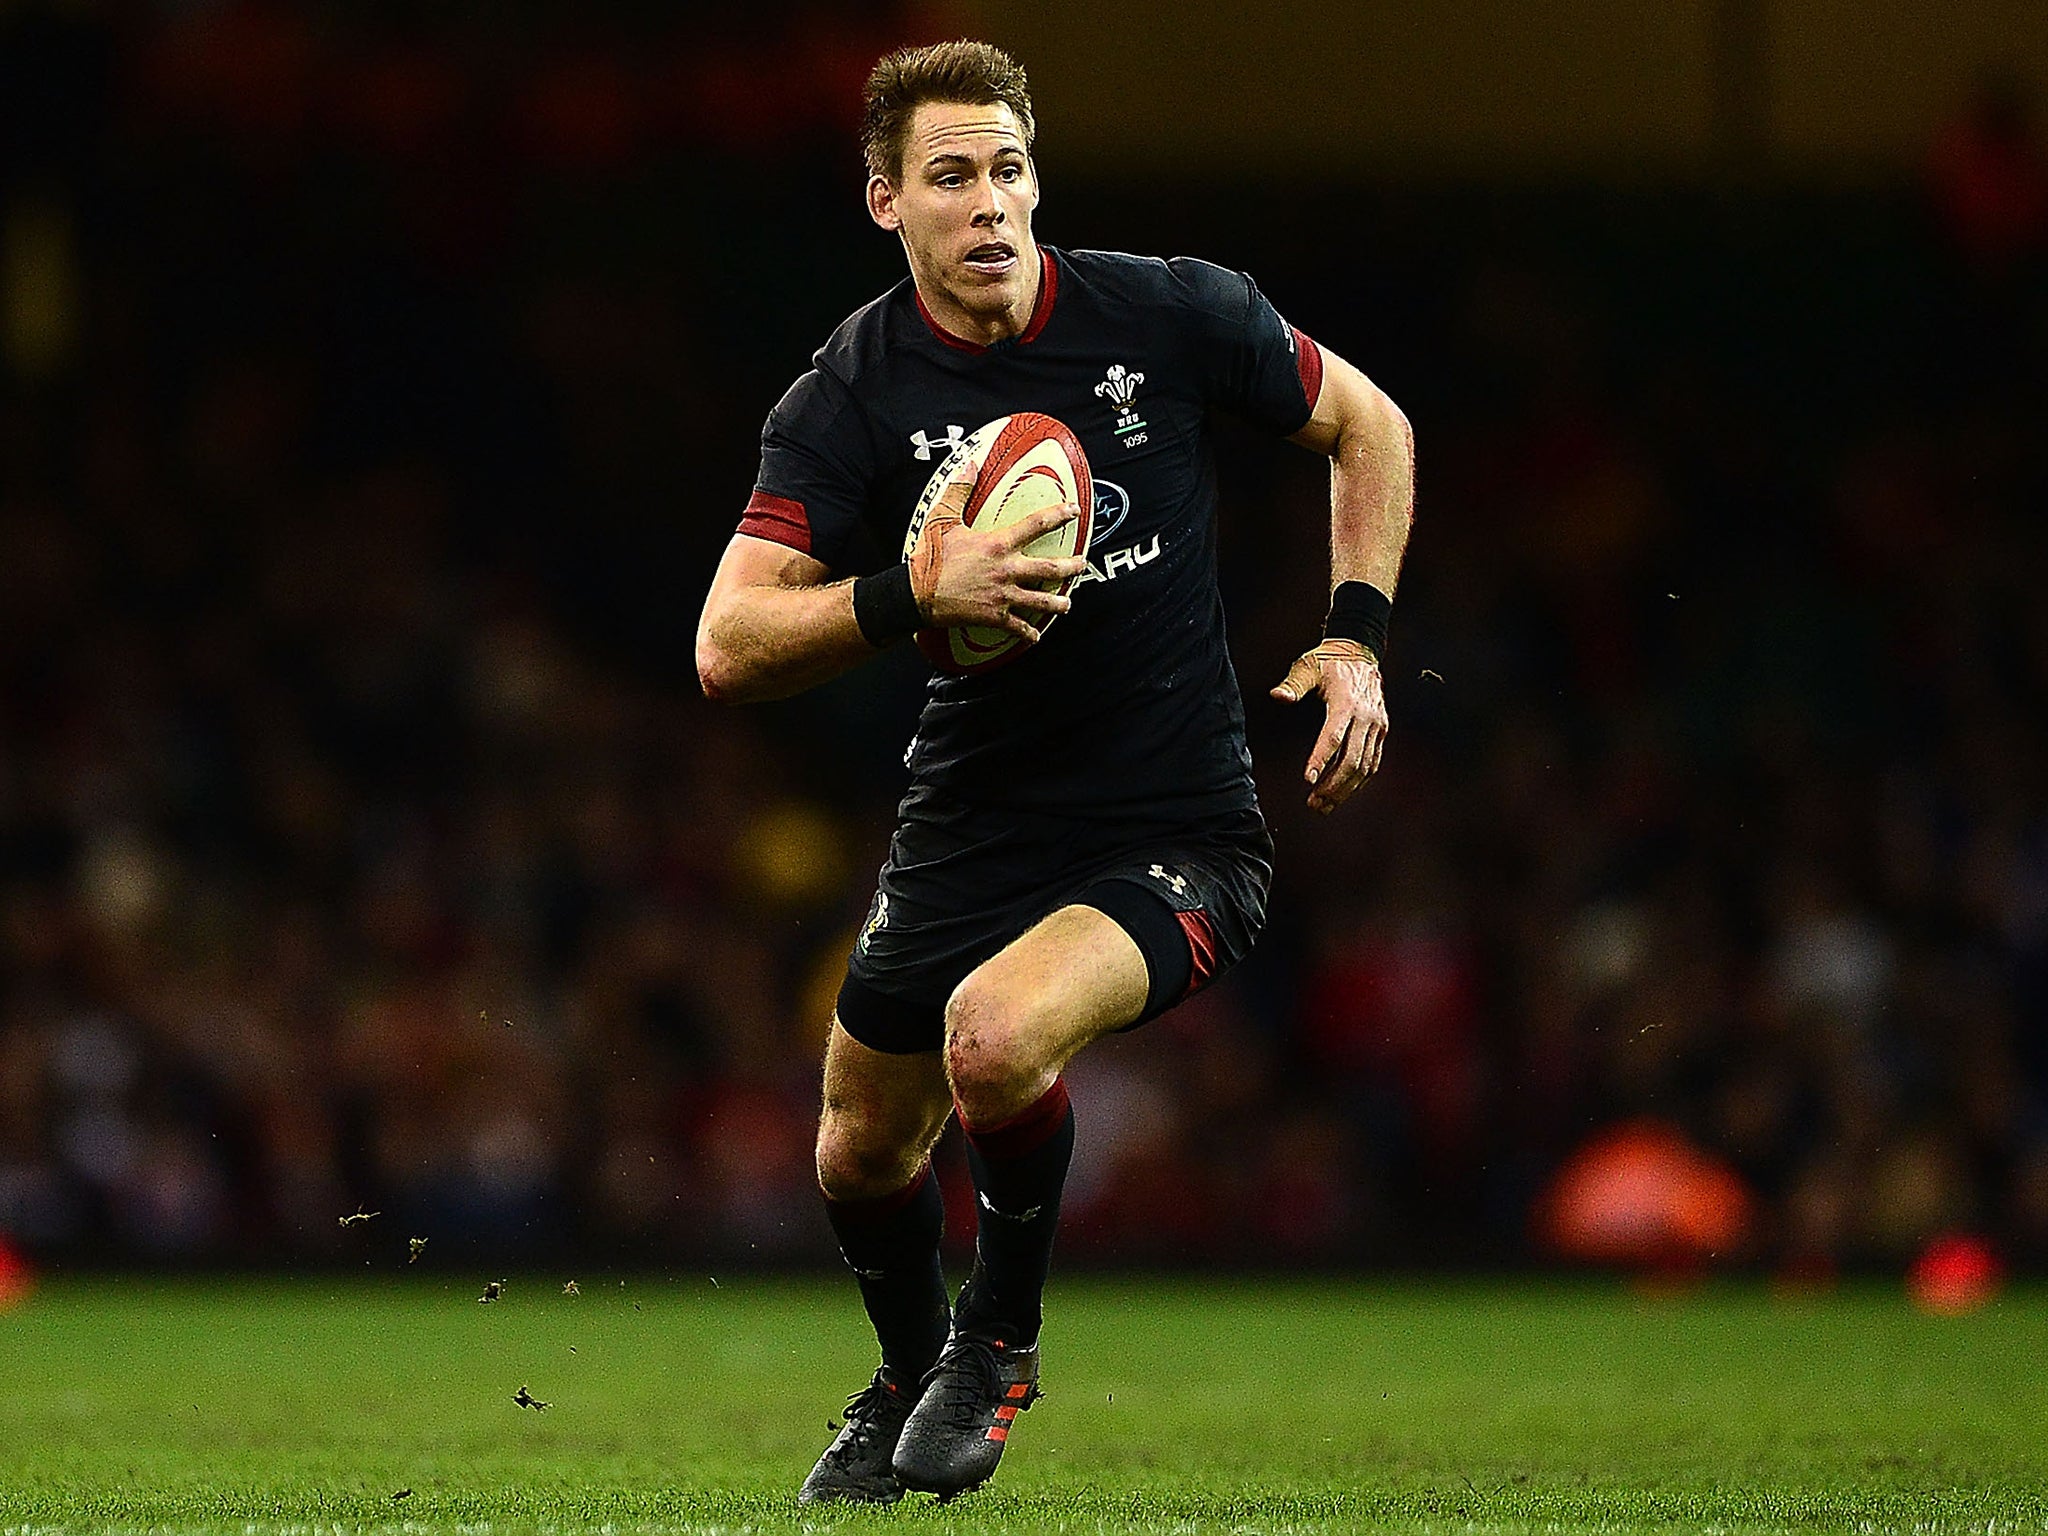 Liam Williams has been ruled out of the remaining autumn internationals